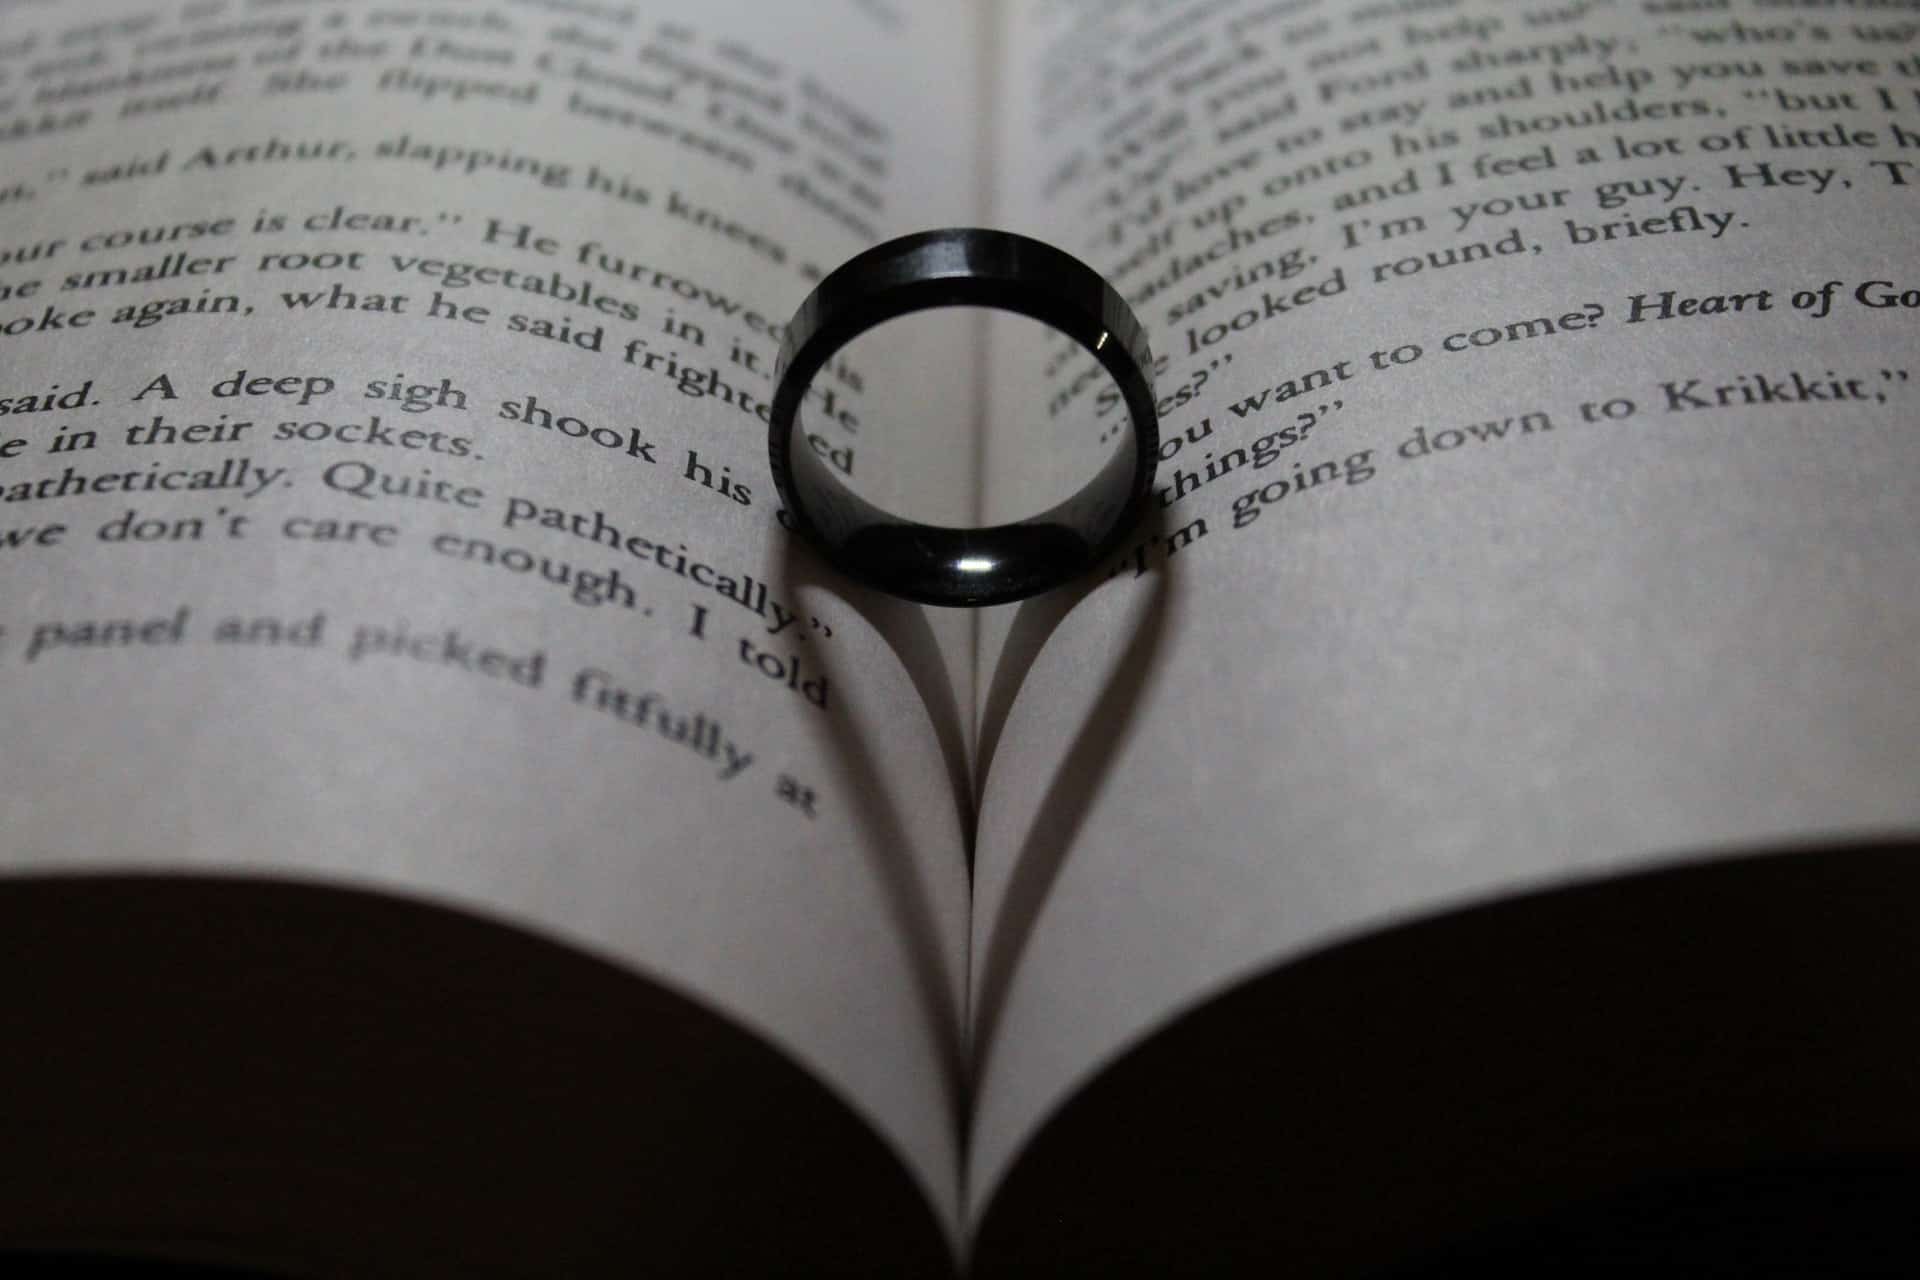 A ring in the fold of a book causing a heart-shaped shadow.